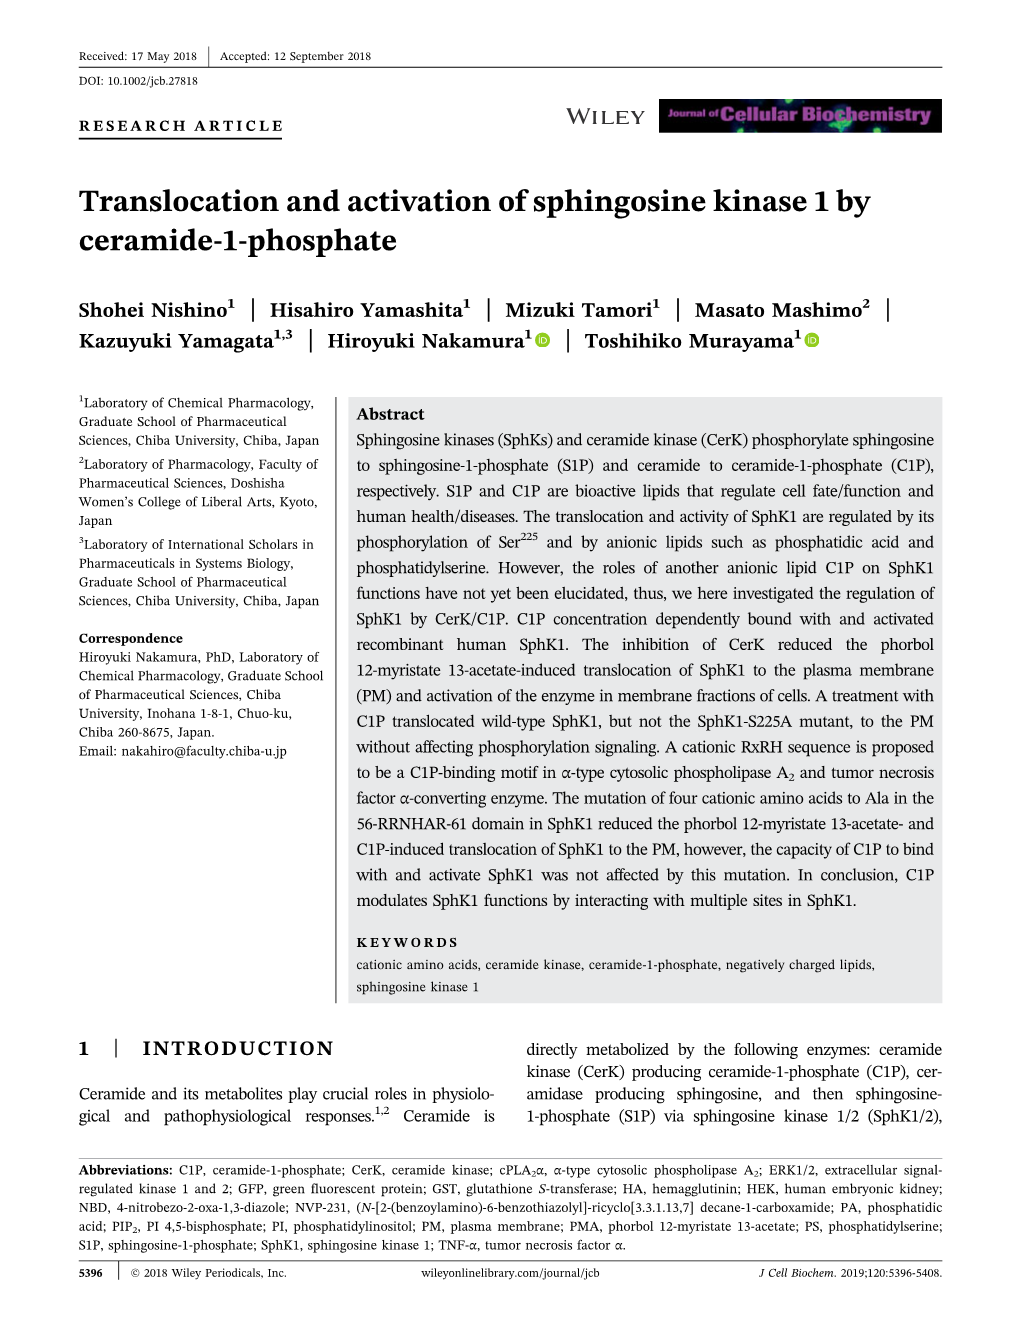 Translocation and Activation of Sphingosine Kinase 1 by Ceramide‐1‐Phosphate